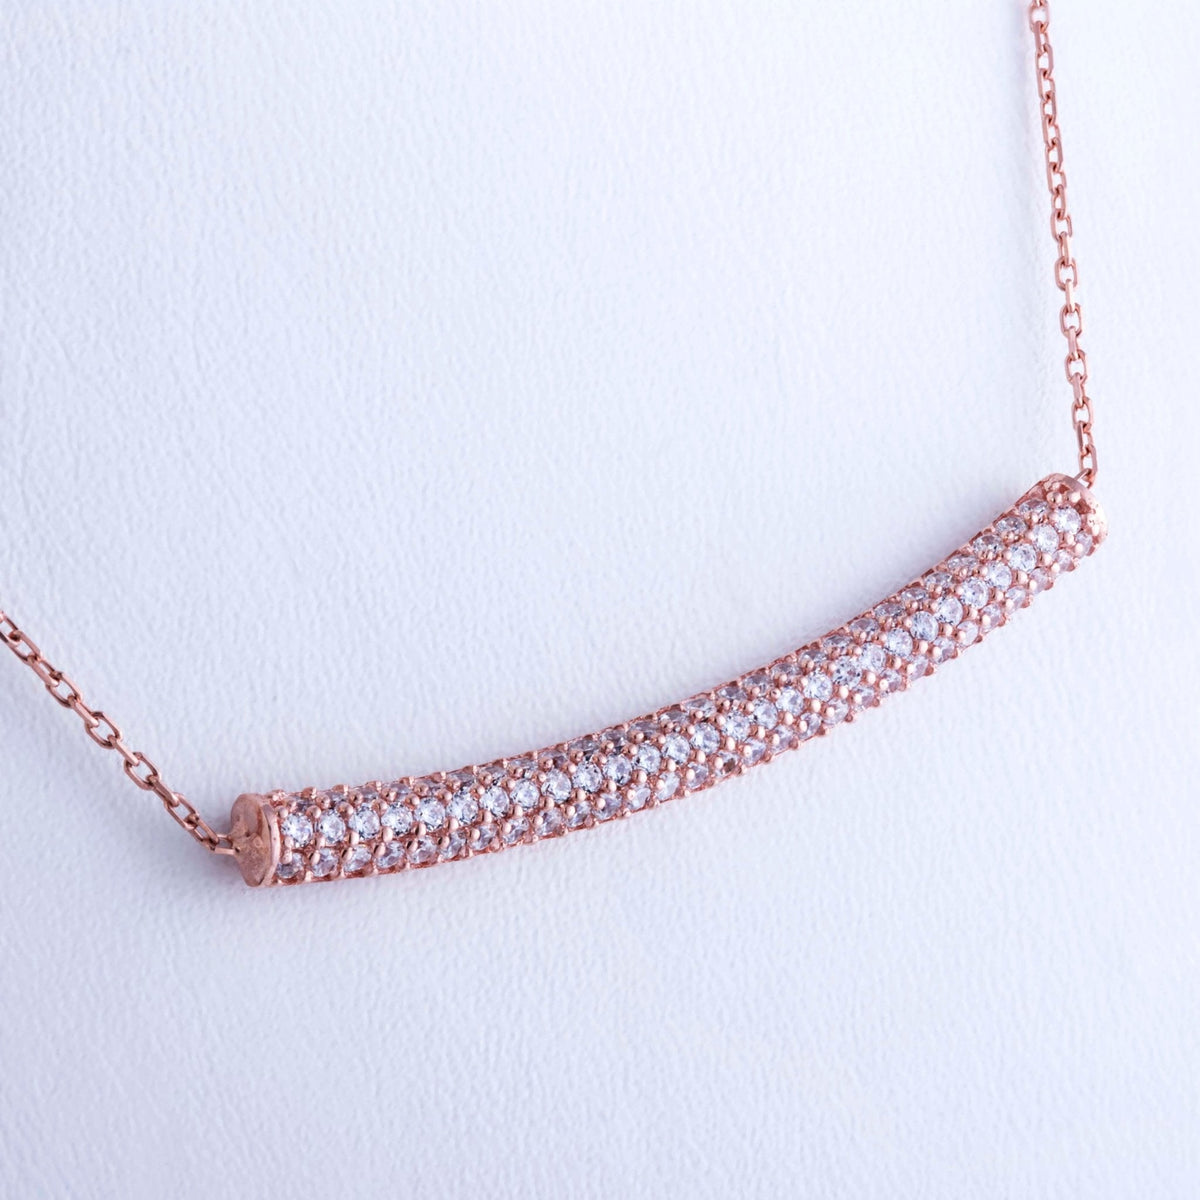 Curved Bar Necklace - amoriumjewelry